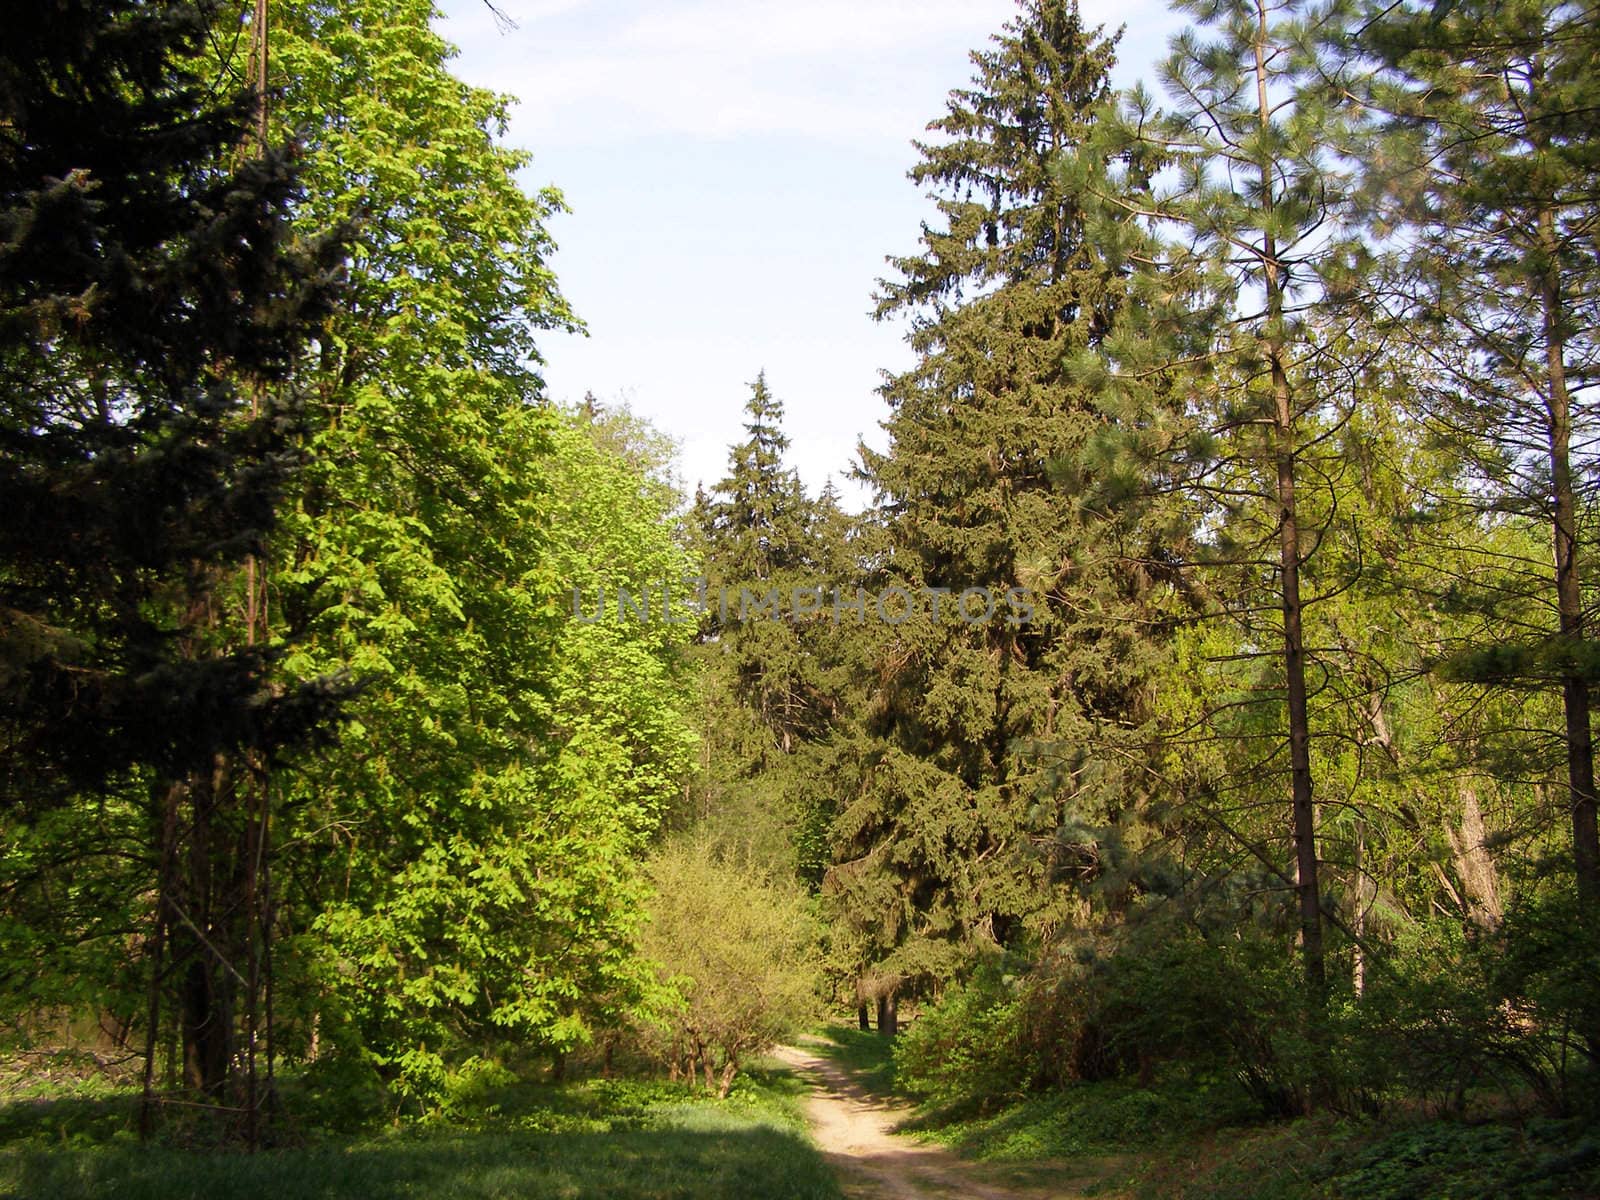 In the reserve of Krasnokutsk is the wide variety of plants, trees and colors. Road leads into the depths of the forest. 